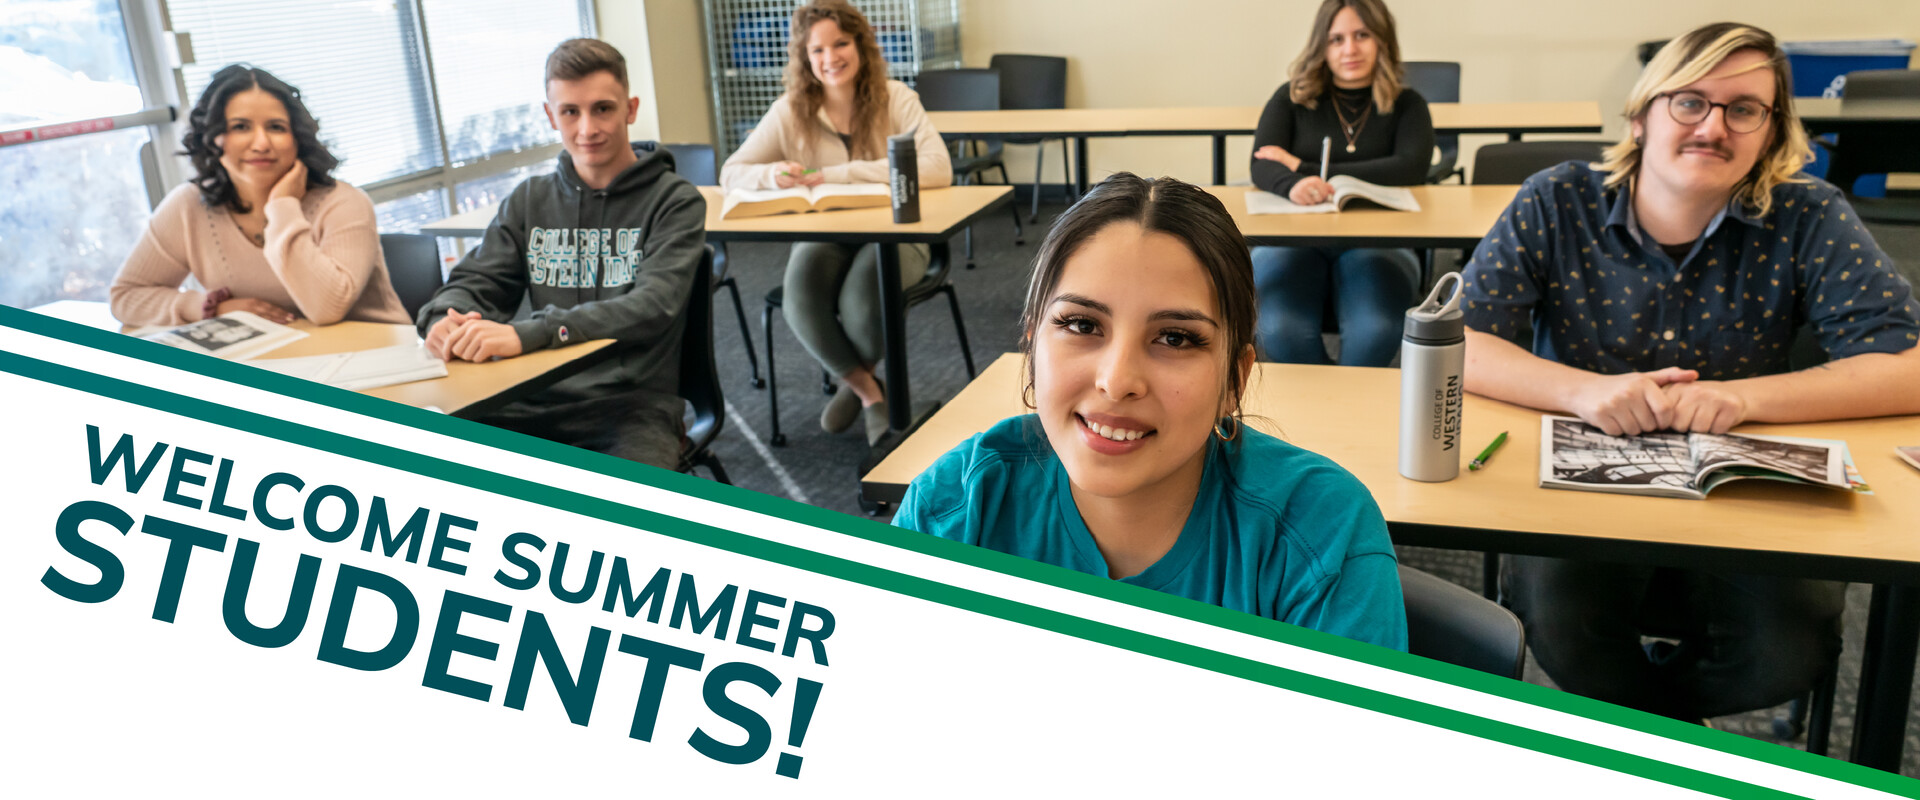 Welcome summer students!